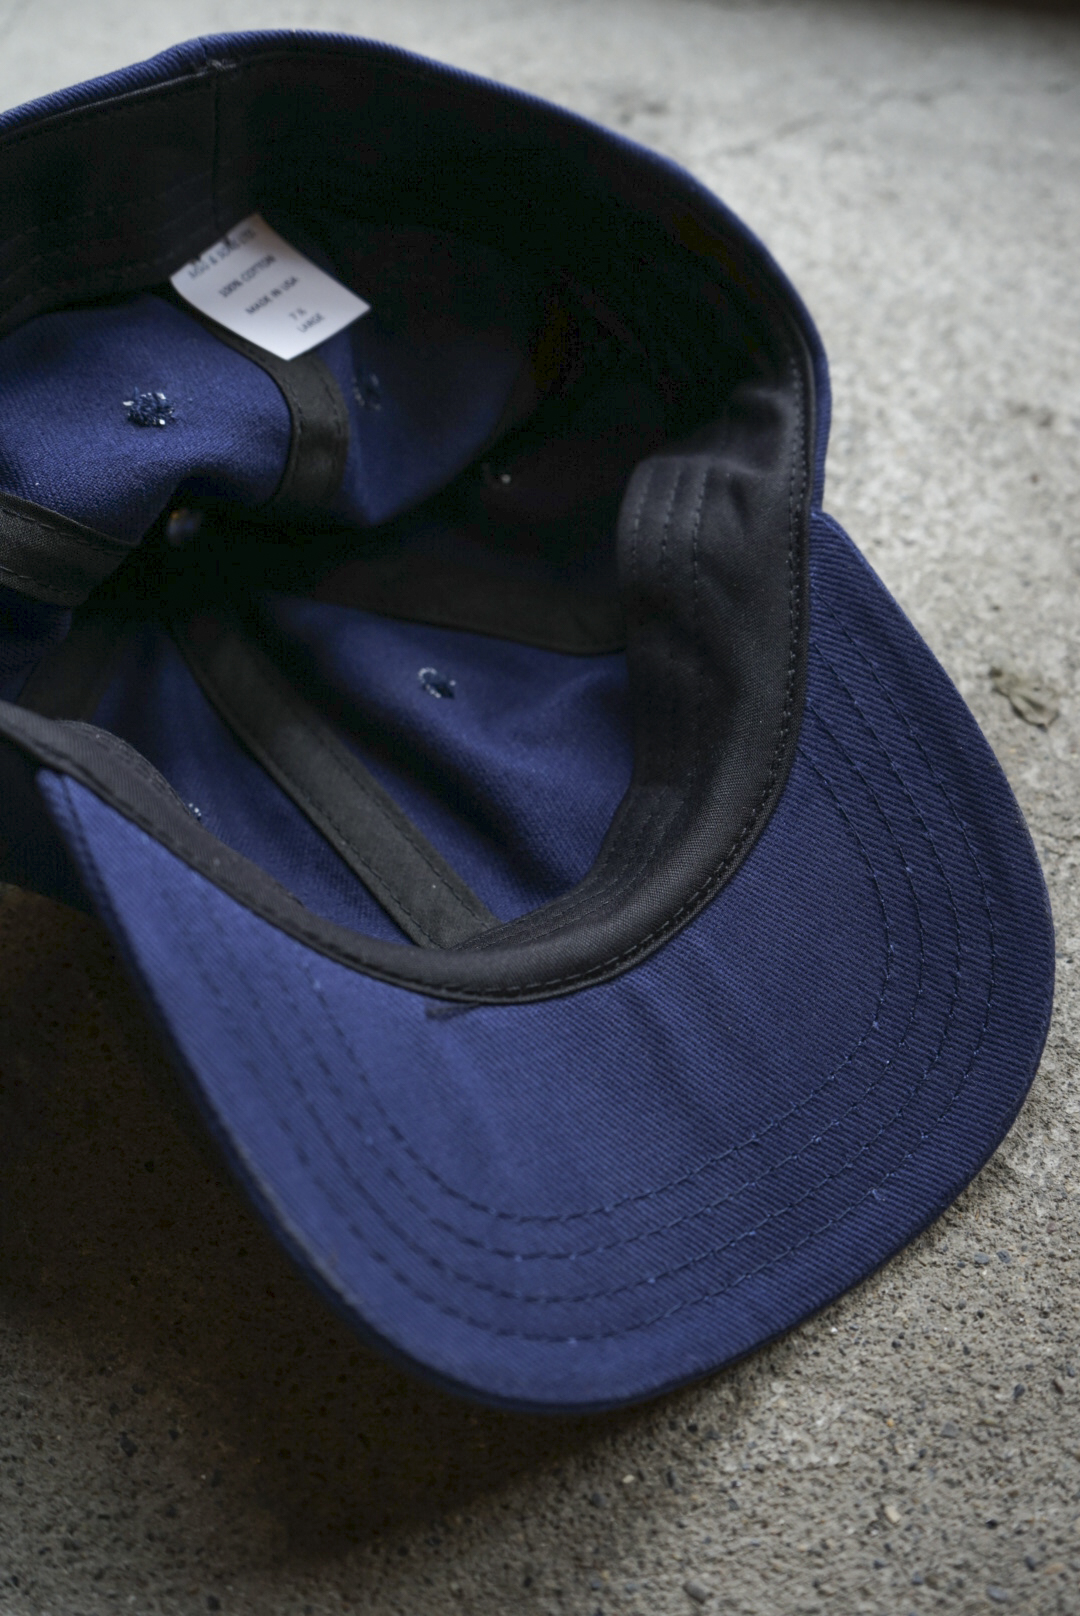 US NAVY BASEBALL CAP - MSG & SONS - ARCH ONLINE SHOP